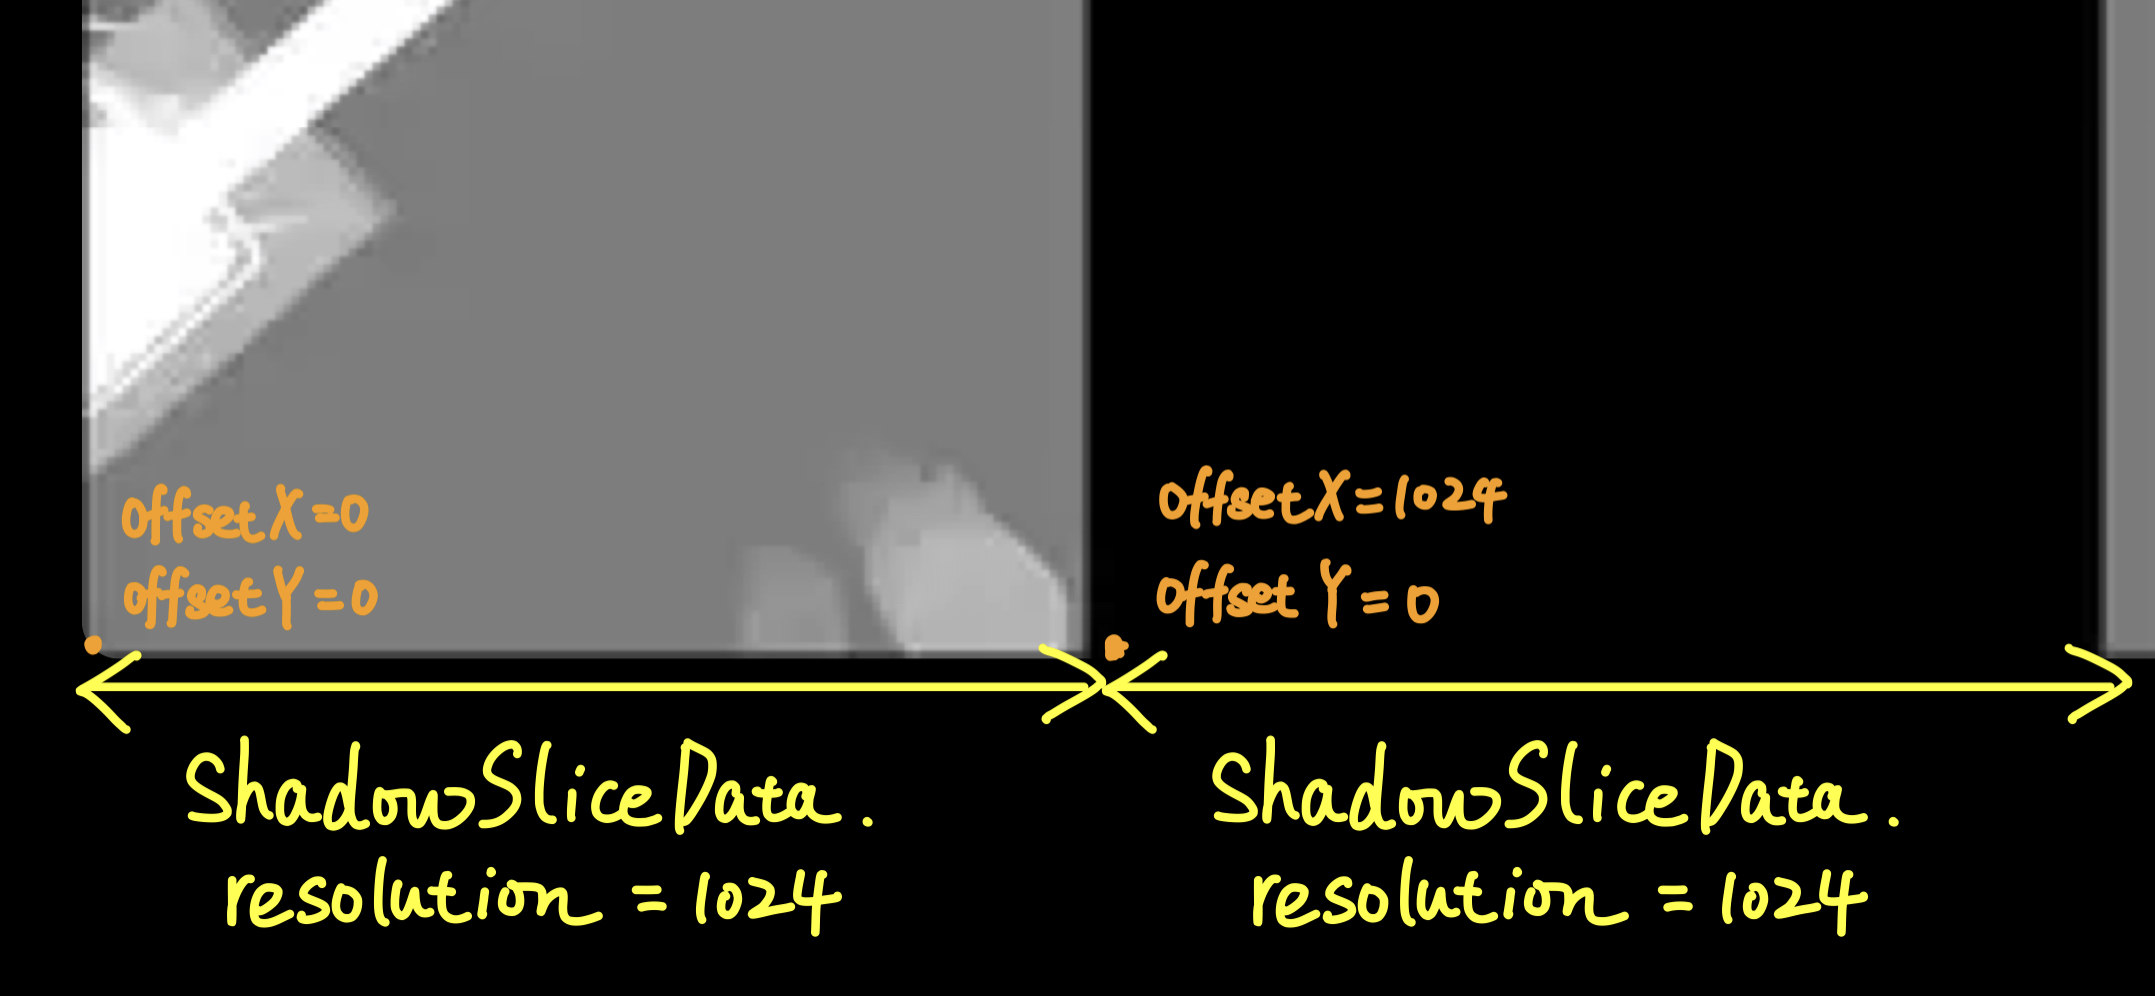 Realtime-point-light-shadows-in-unity-URP%20baf834be833f442c9610cd00f4c22bf7/Untitled%201.png